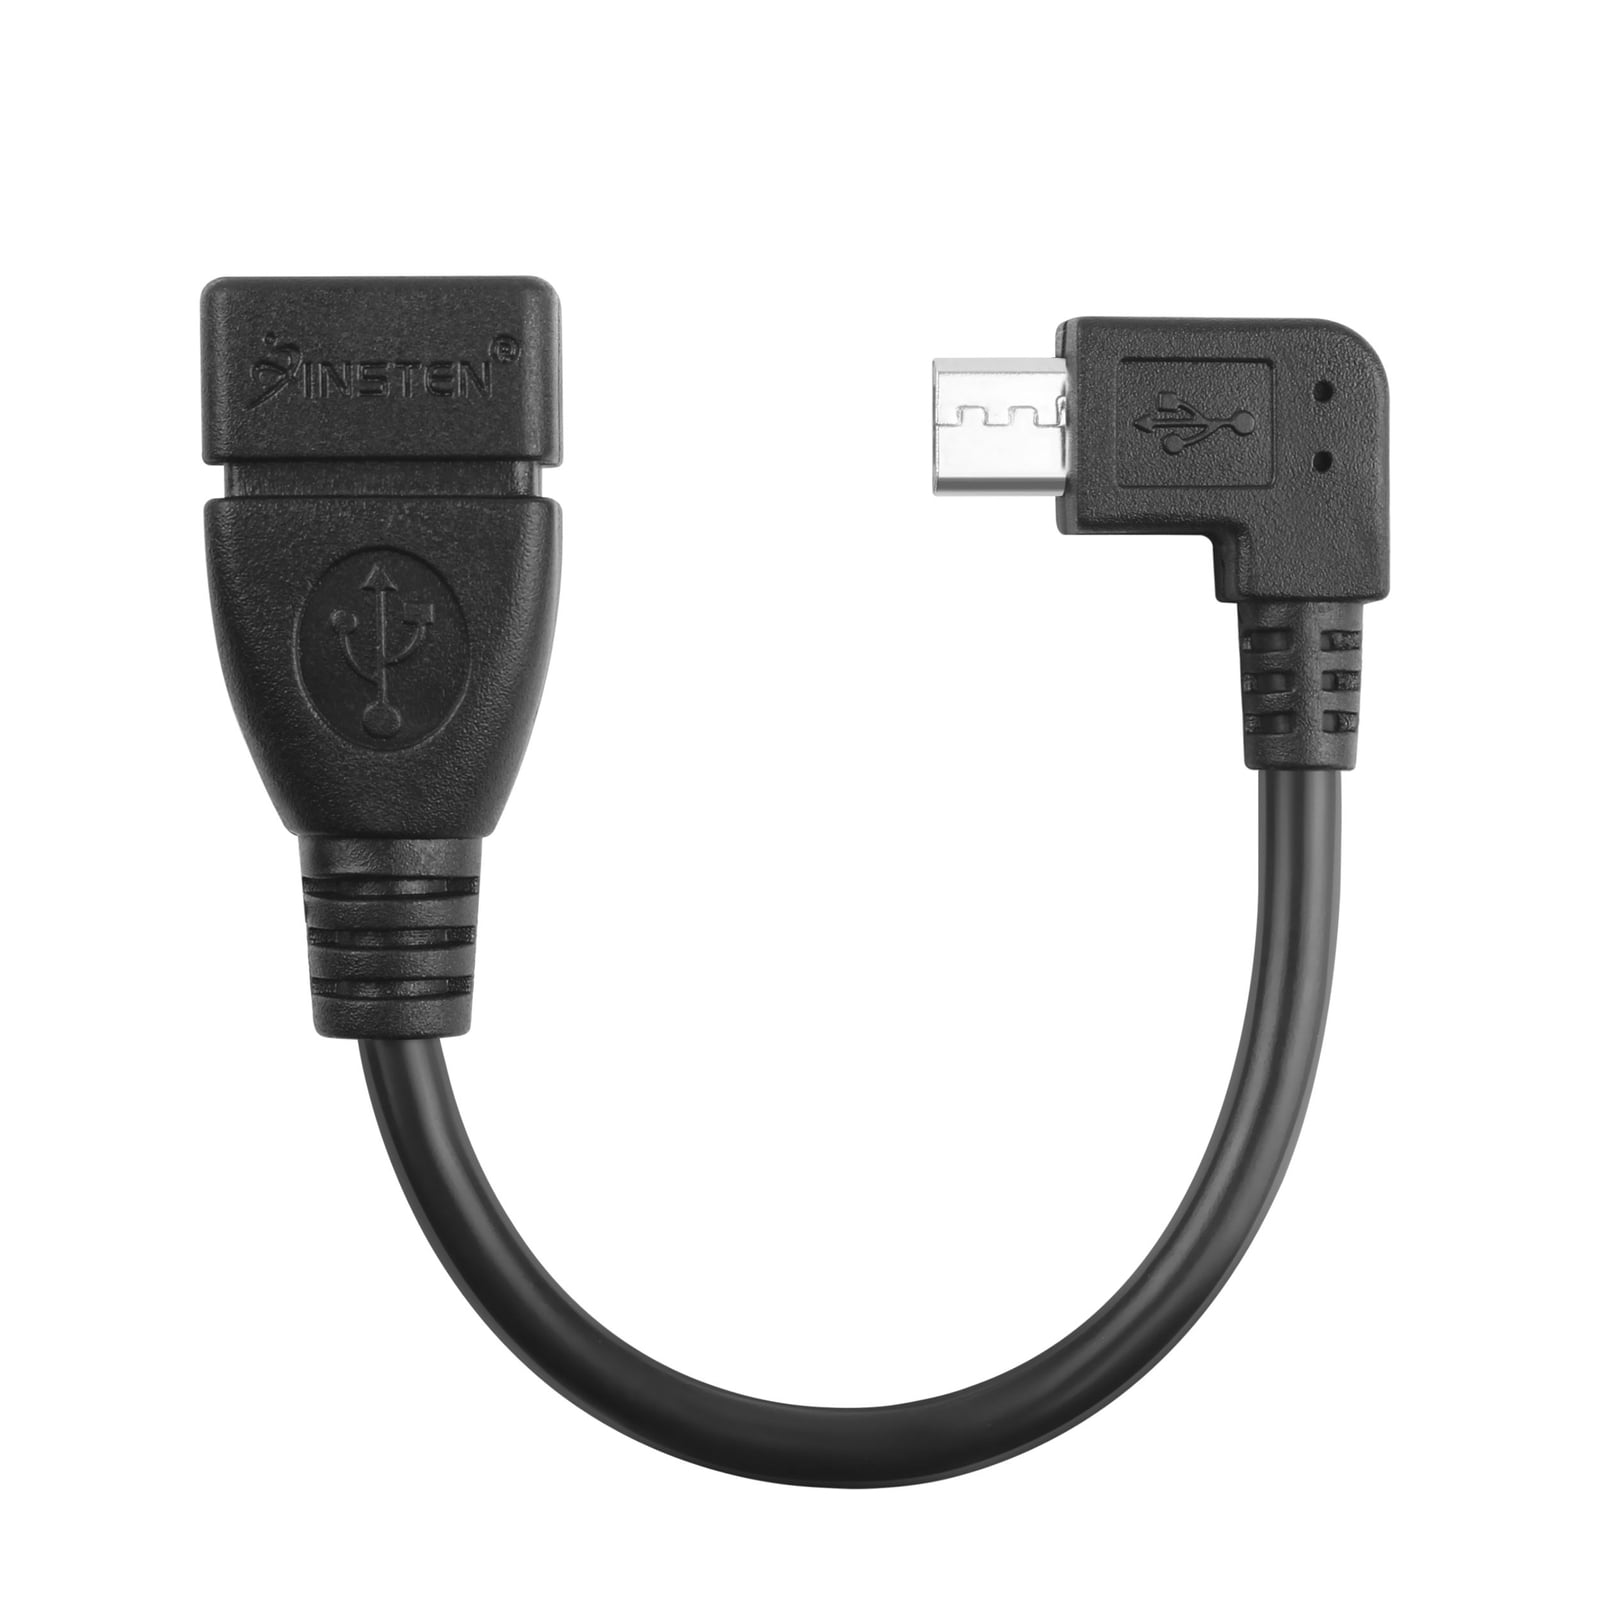 OTG Adapter Micro USB Cables OTG USB Cable Micro USB To USB for Samsung LG  Sony